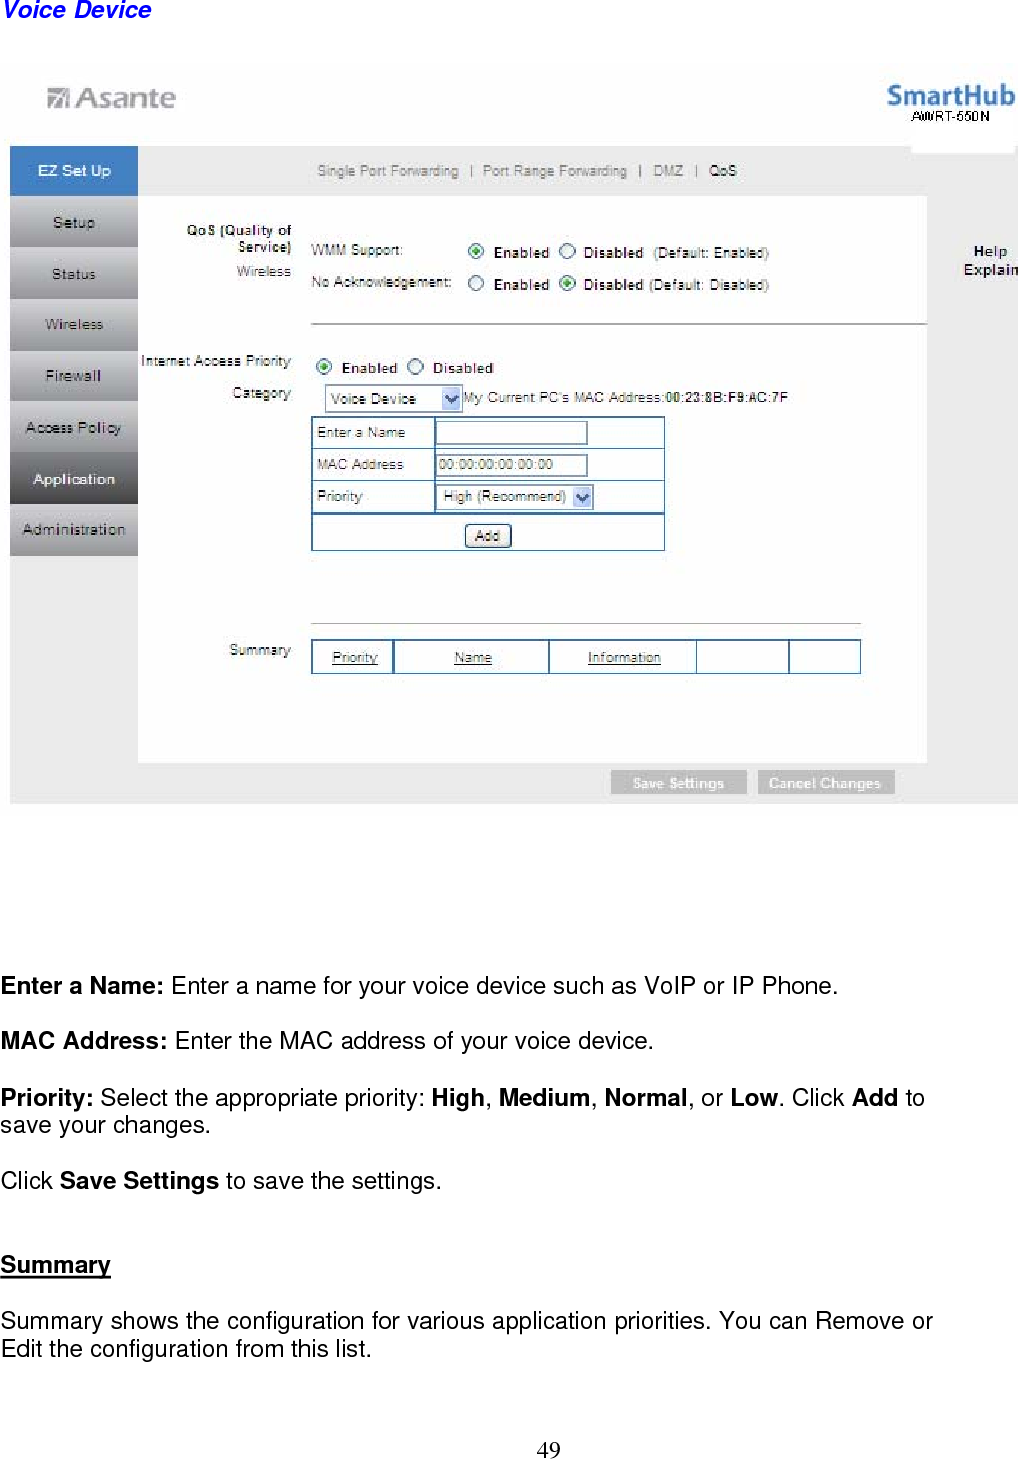  49Voice Device  Enter a Name: Enter a name for your voice device such as VoIP or IP Phone. MAC Address: Enter the MAC address of your voice device. Priority: Select the appropriate priority: High, Medium, Normal, or Low. Click Add to save your changes.  Click Save Settings to save the settings. Summary Summary shows the configuration for various application priorities. You can Remove or  Edit the configuration from this list.  